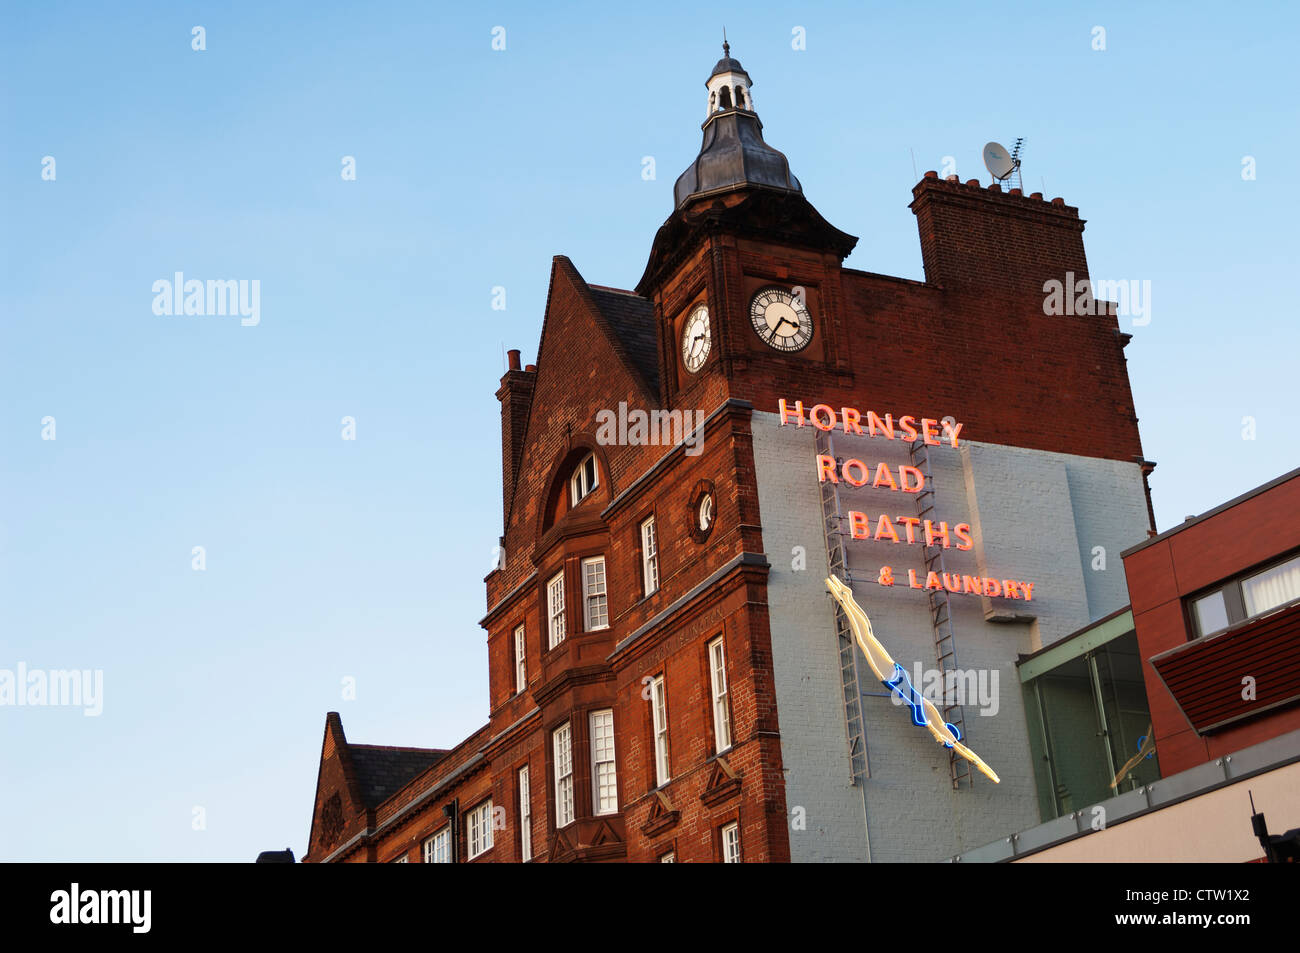 Looking up at a neon sign for the Hornsey Road Baths & Laundry. Stock Photo